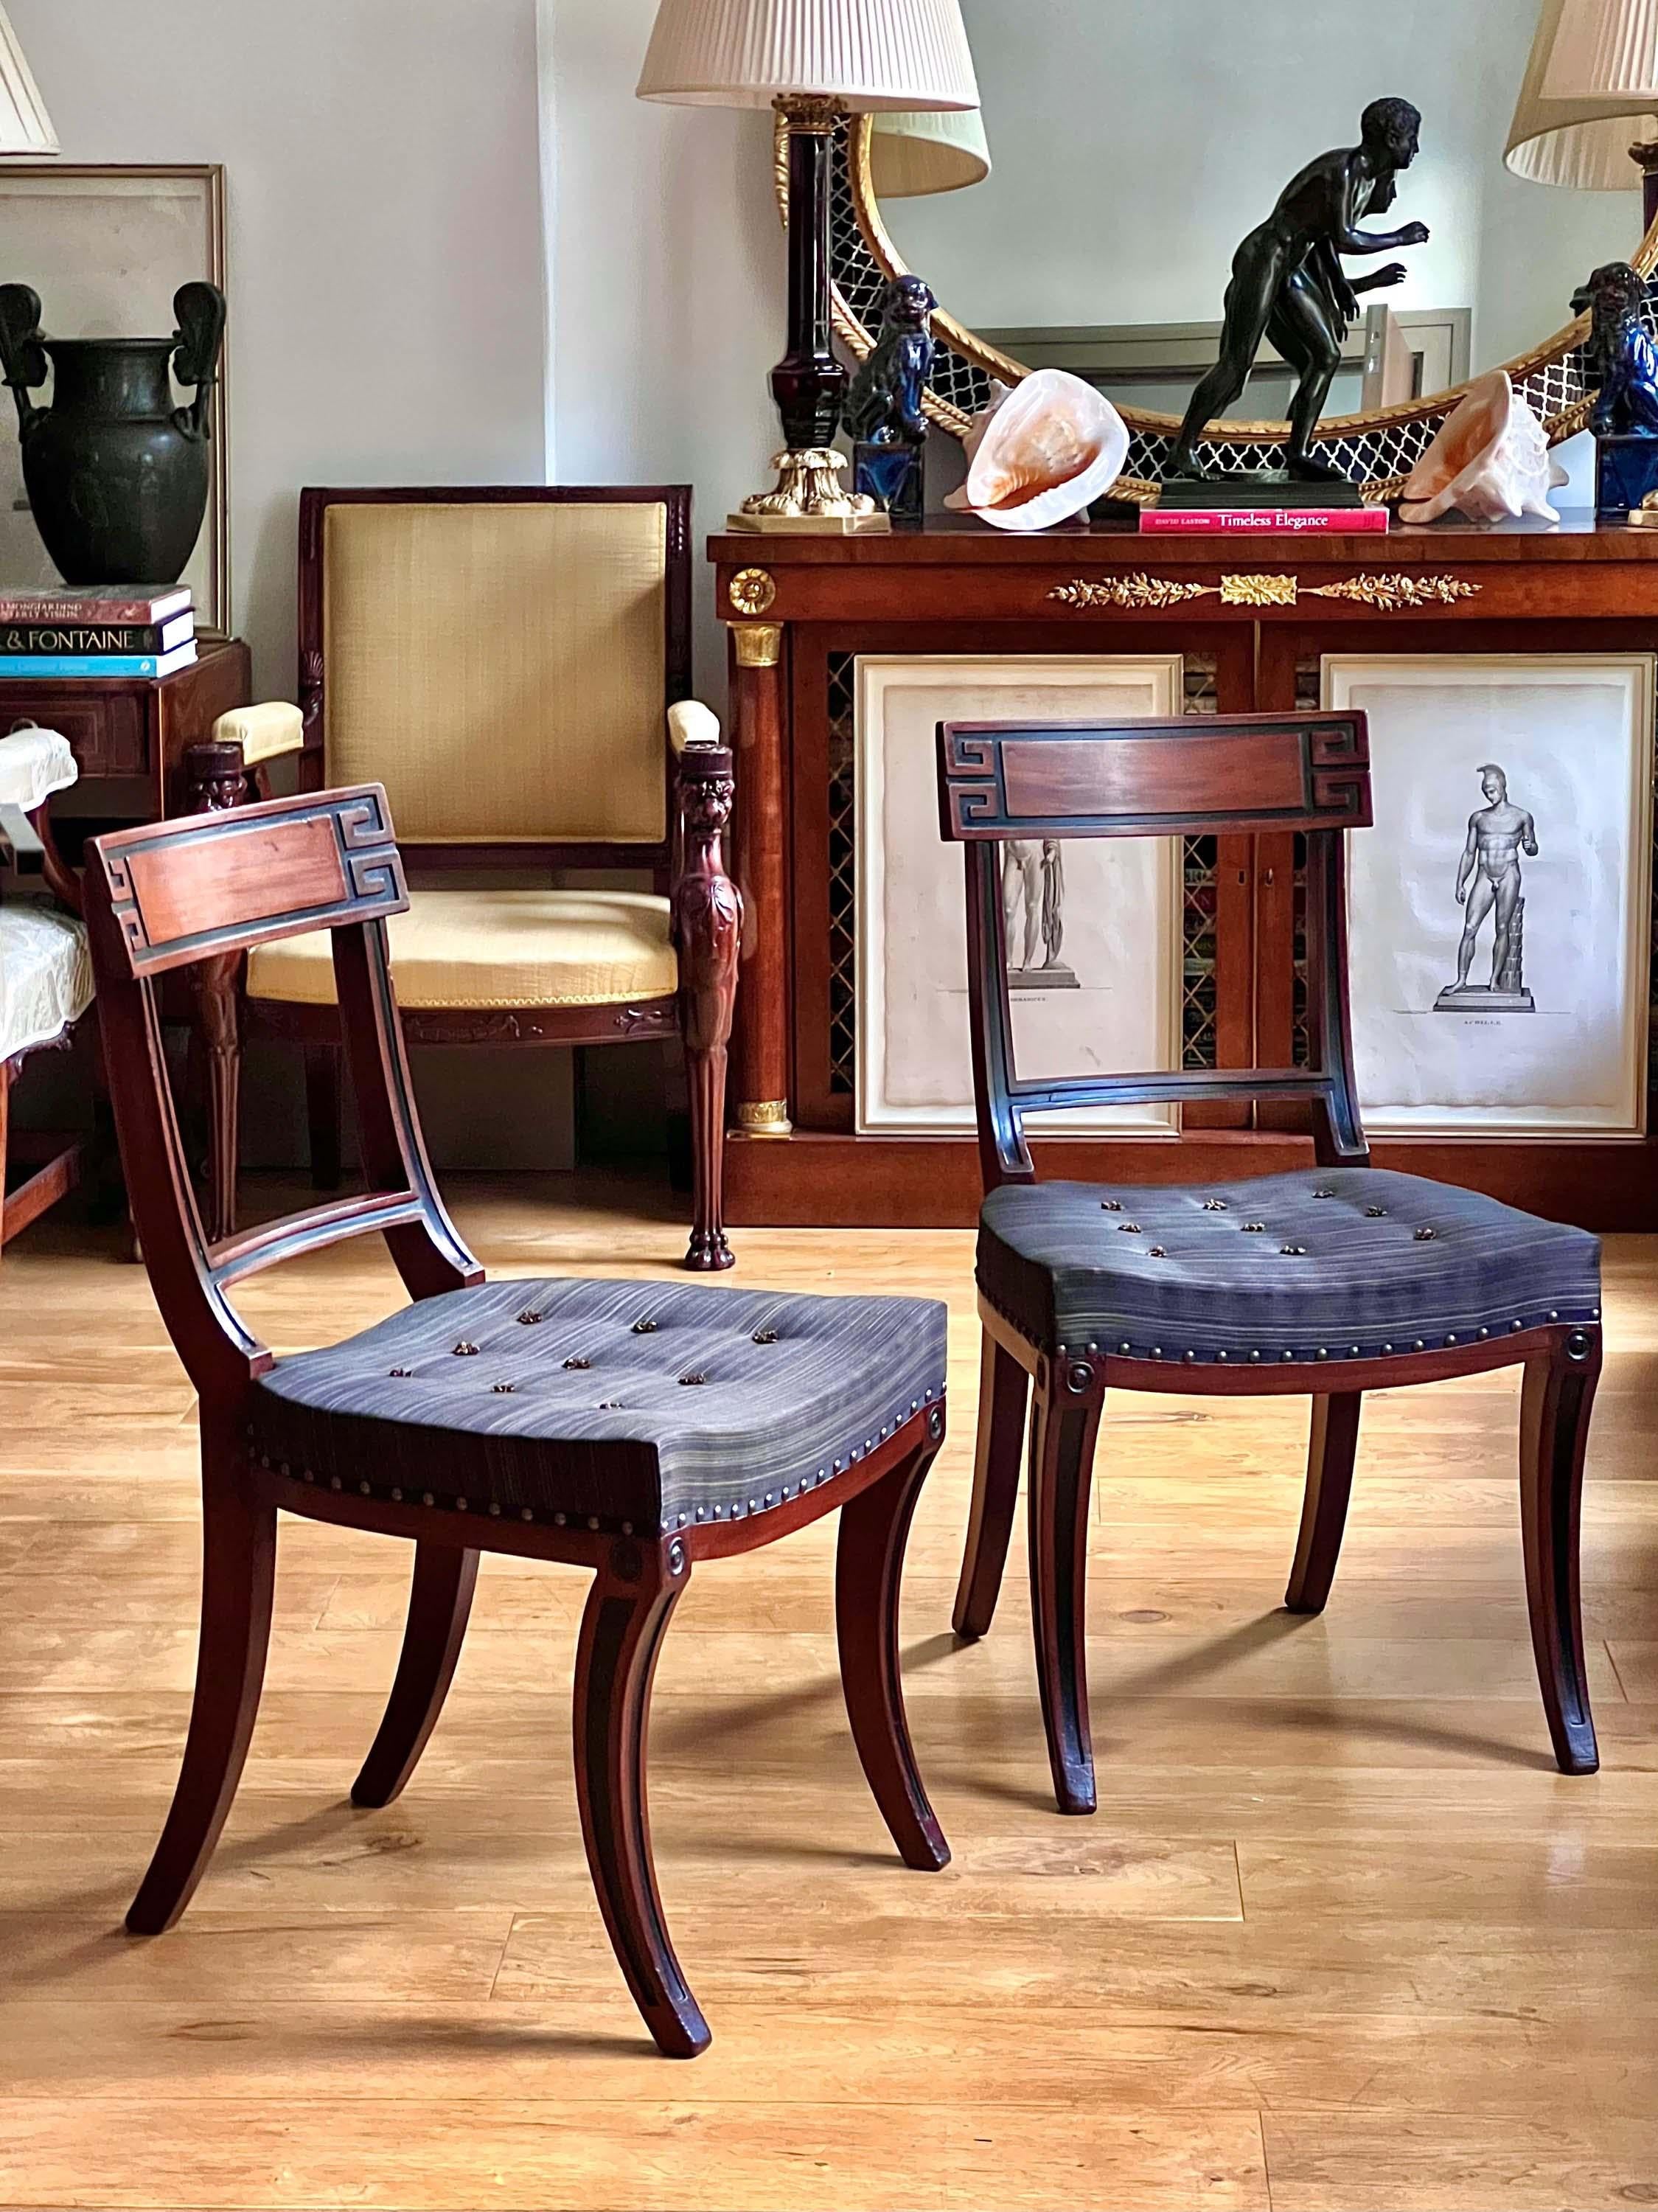 A very chic Regency period pair of 'Klismos' chairs with Greek key decoration to the backs, attributable to Gillows of Lancaster and London,

England, circa 1805.

Why we like them
These superb quality, wonderfully stylish Klismos chairs,